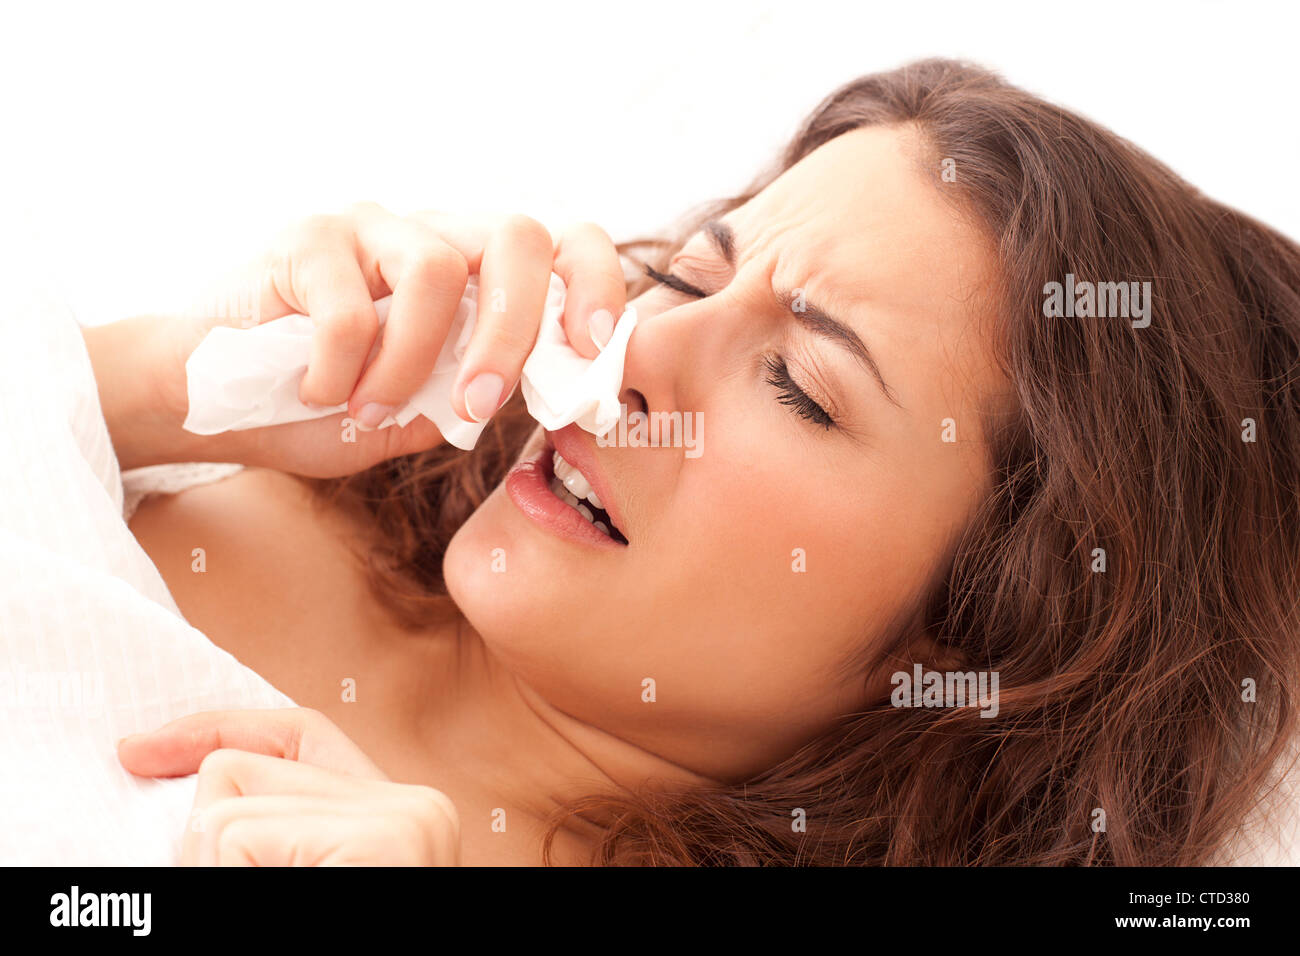 Woman with a cold Stock Photo